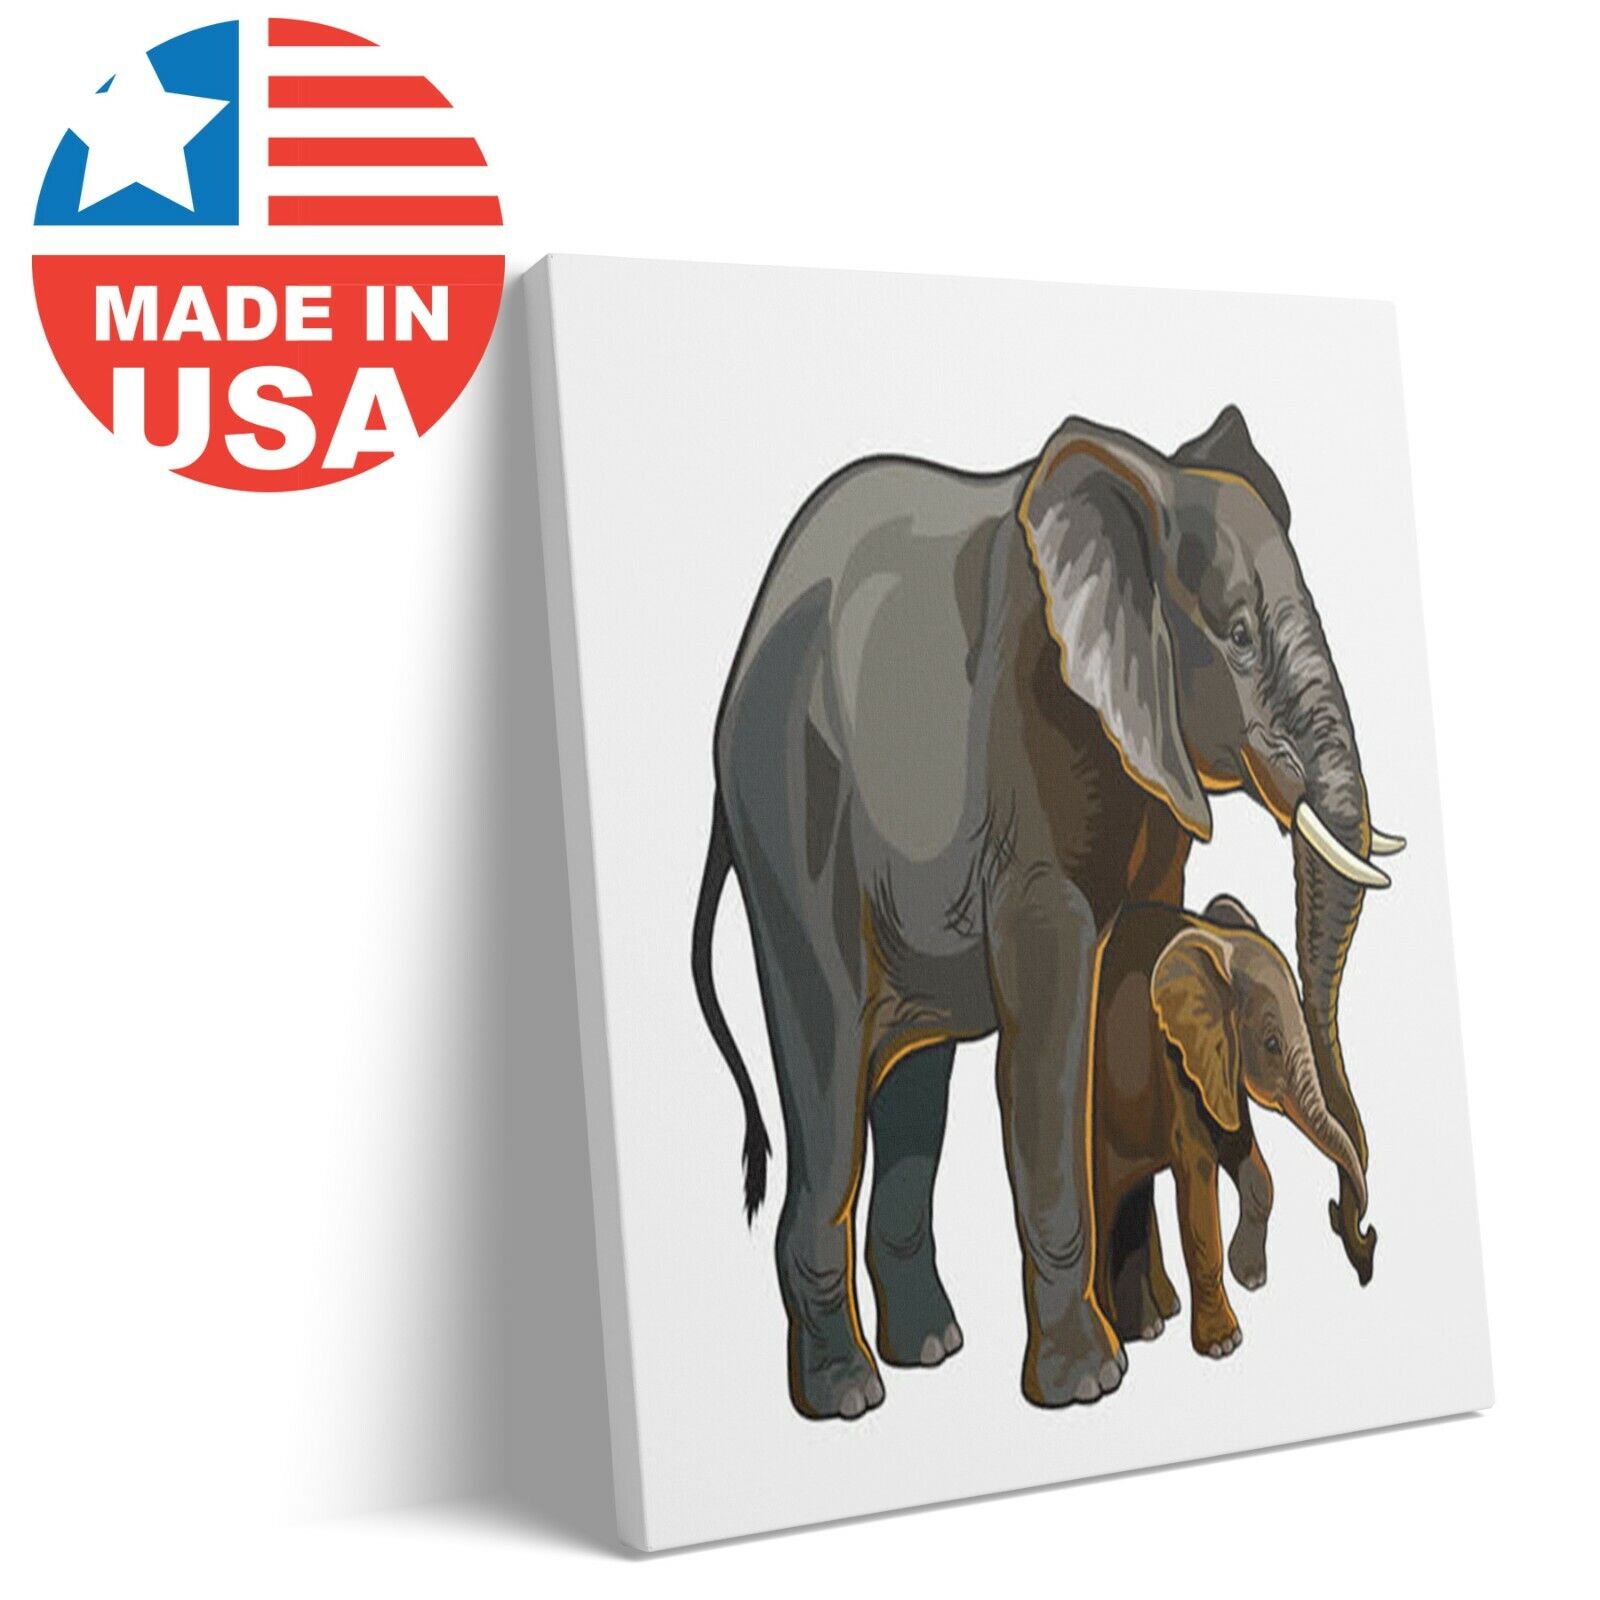 Personalized Dinosaur Canvas Prints with Your Photos